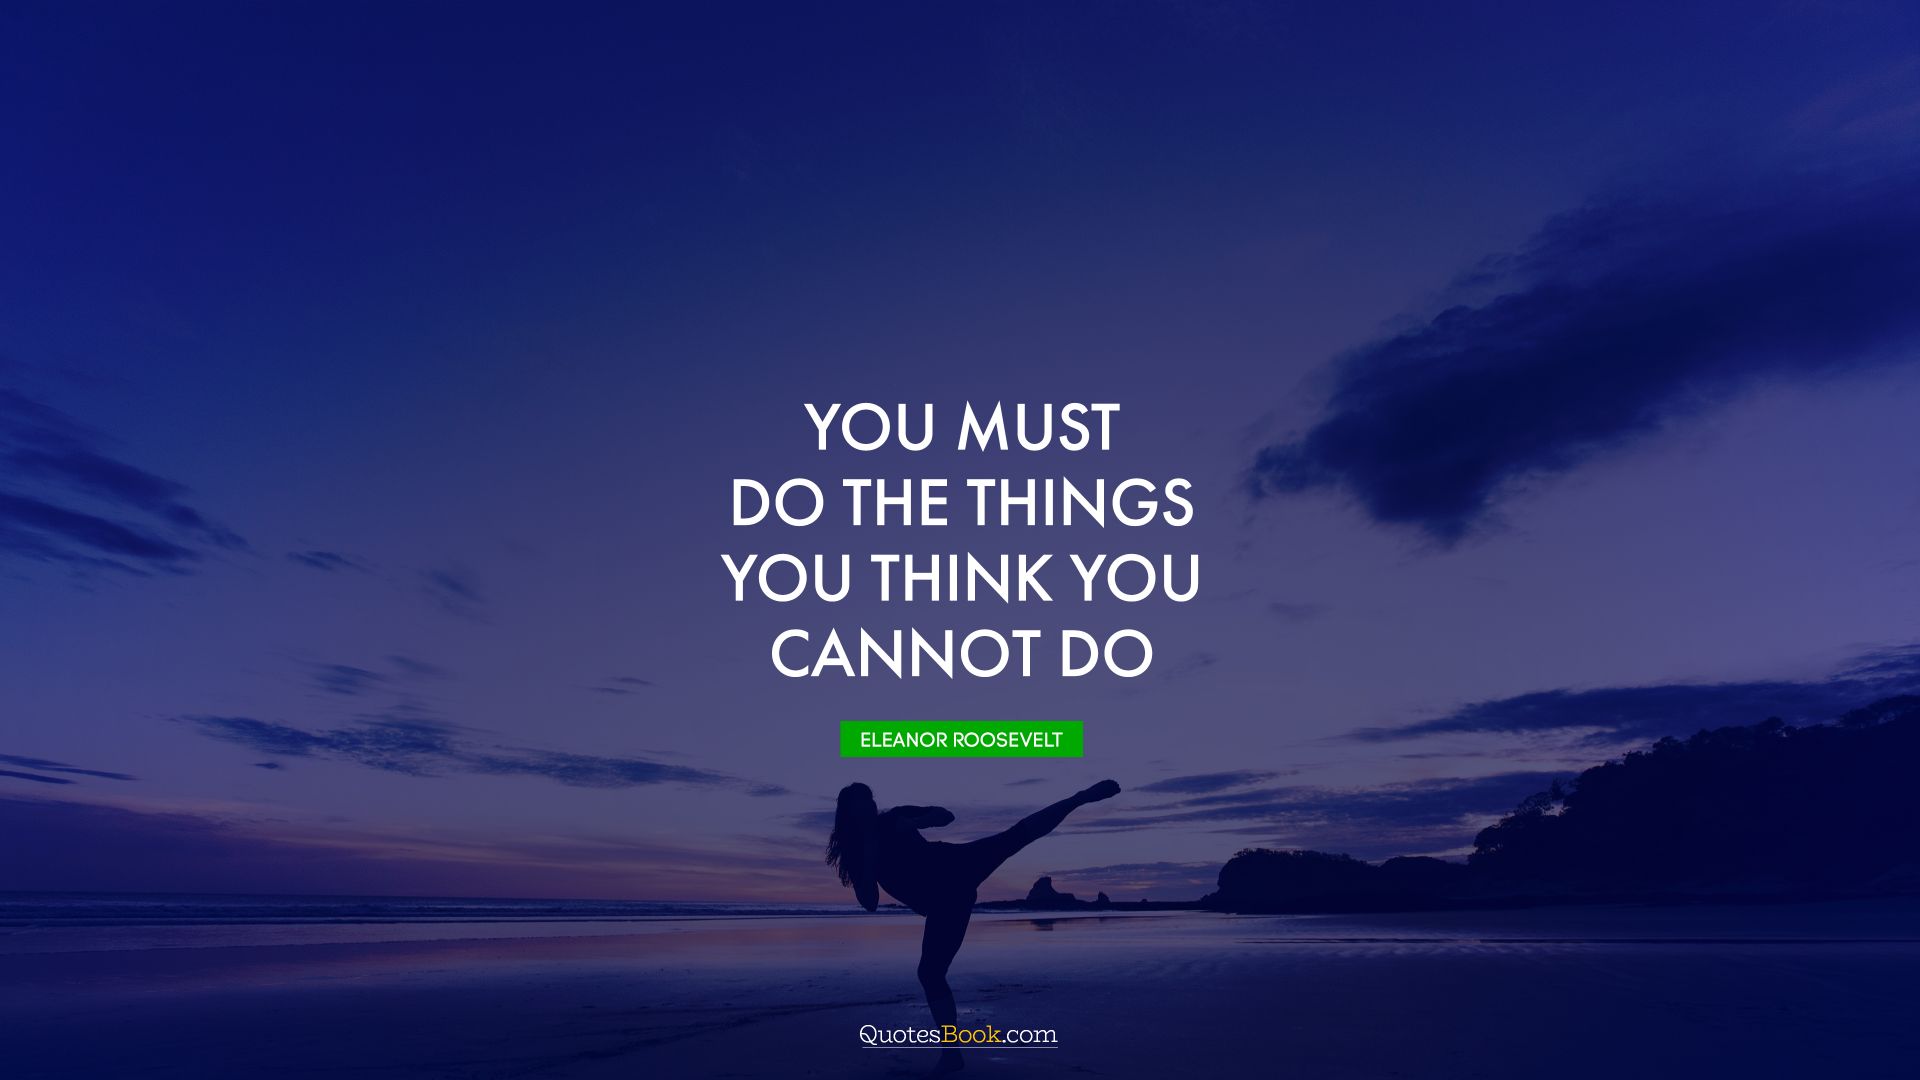 You must do the things you think you cannot do. - Quote by Eleanor Roosevelt